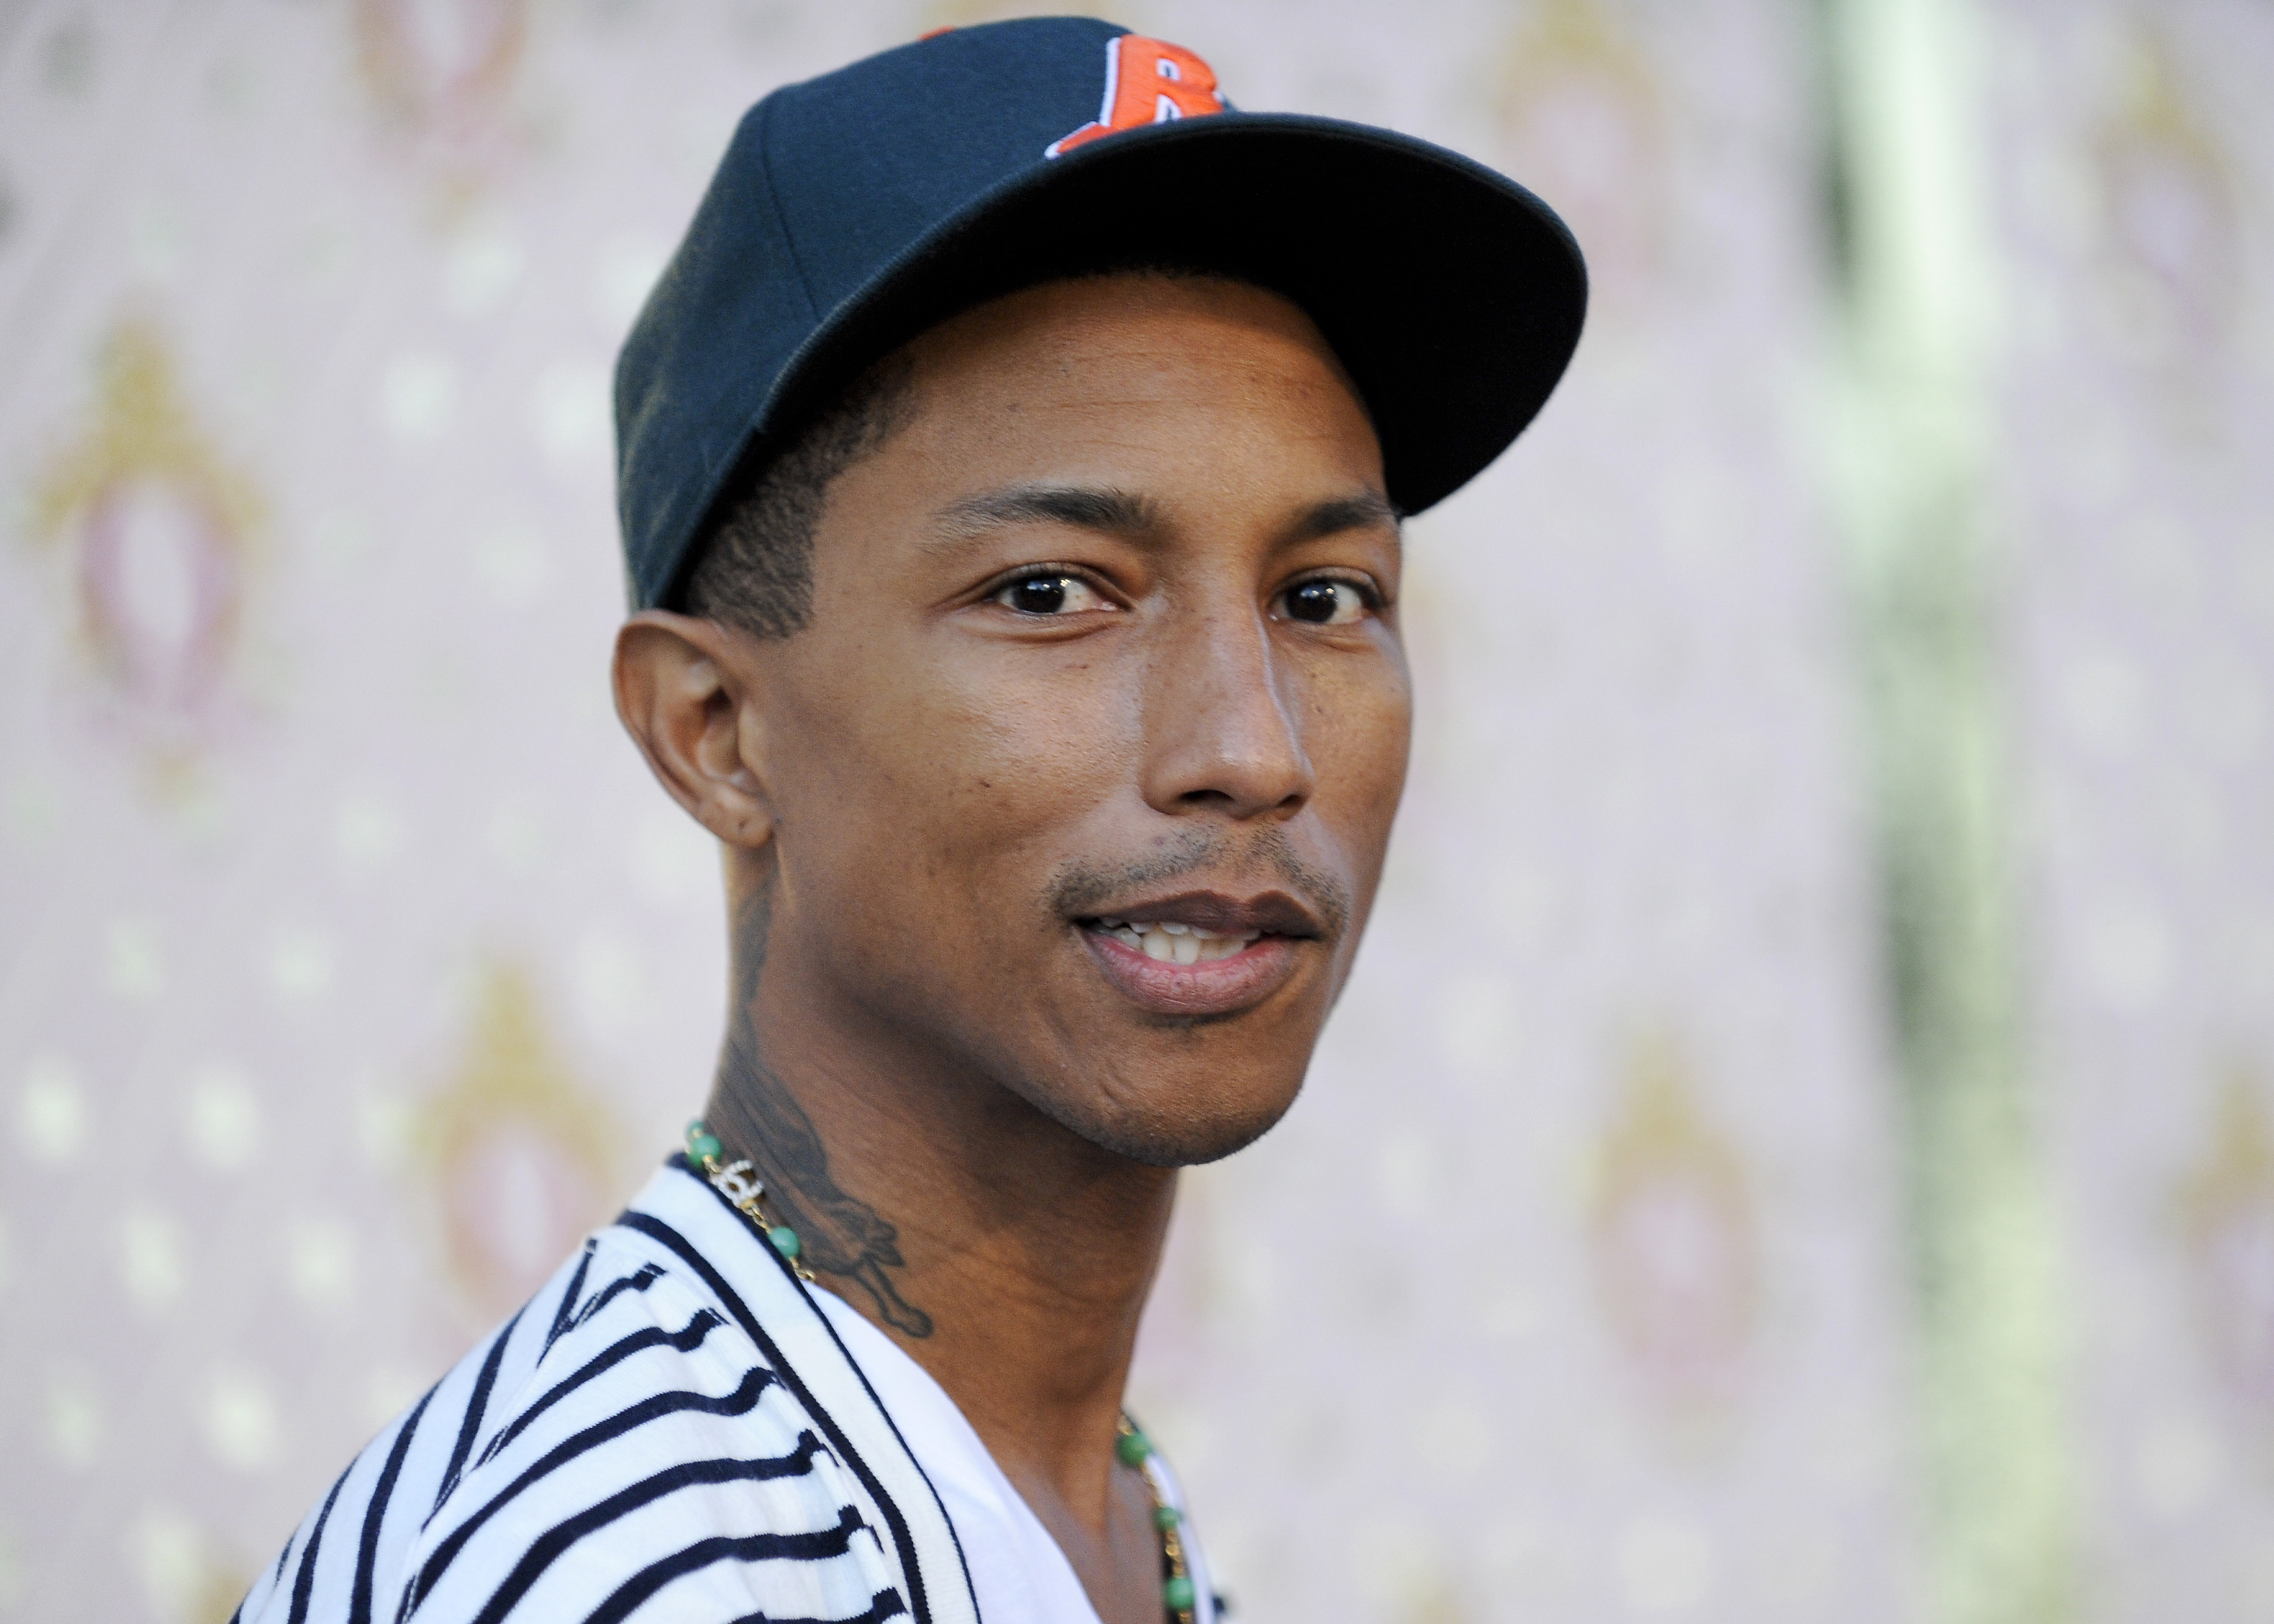 Designer, actor, producer Pharrell Williams arrives at his launch for his new liqueur in the Beverly Hills area of Los Angeles